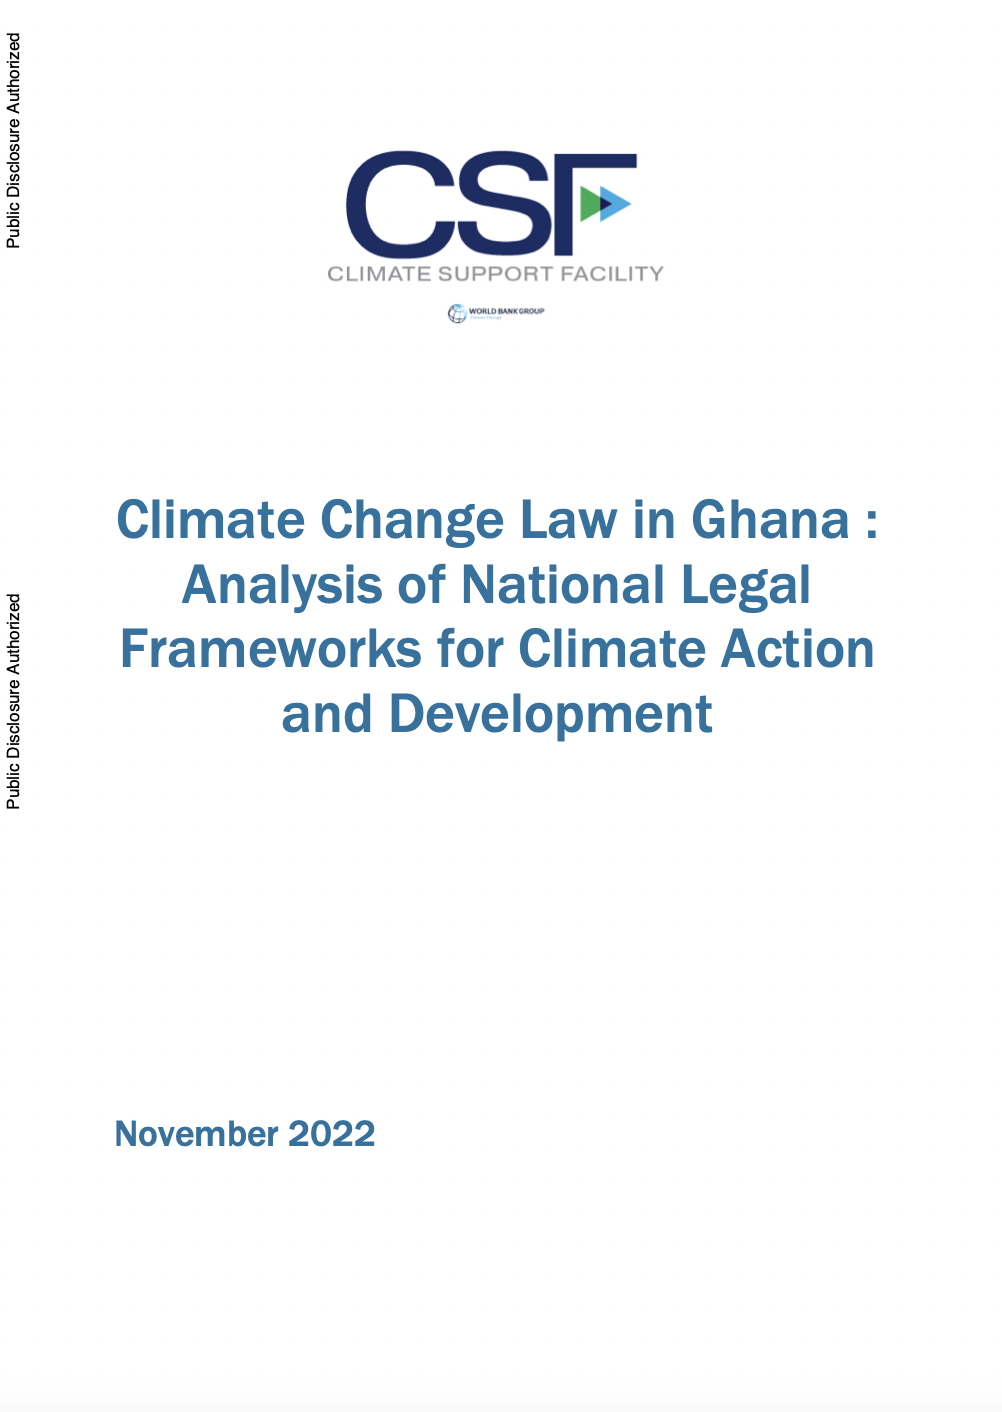 Climate Change Law in Ghana : Analysis of National Legal Frameworks for Climate Action and Development